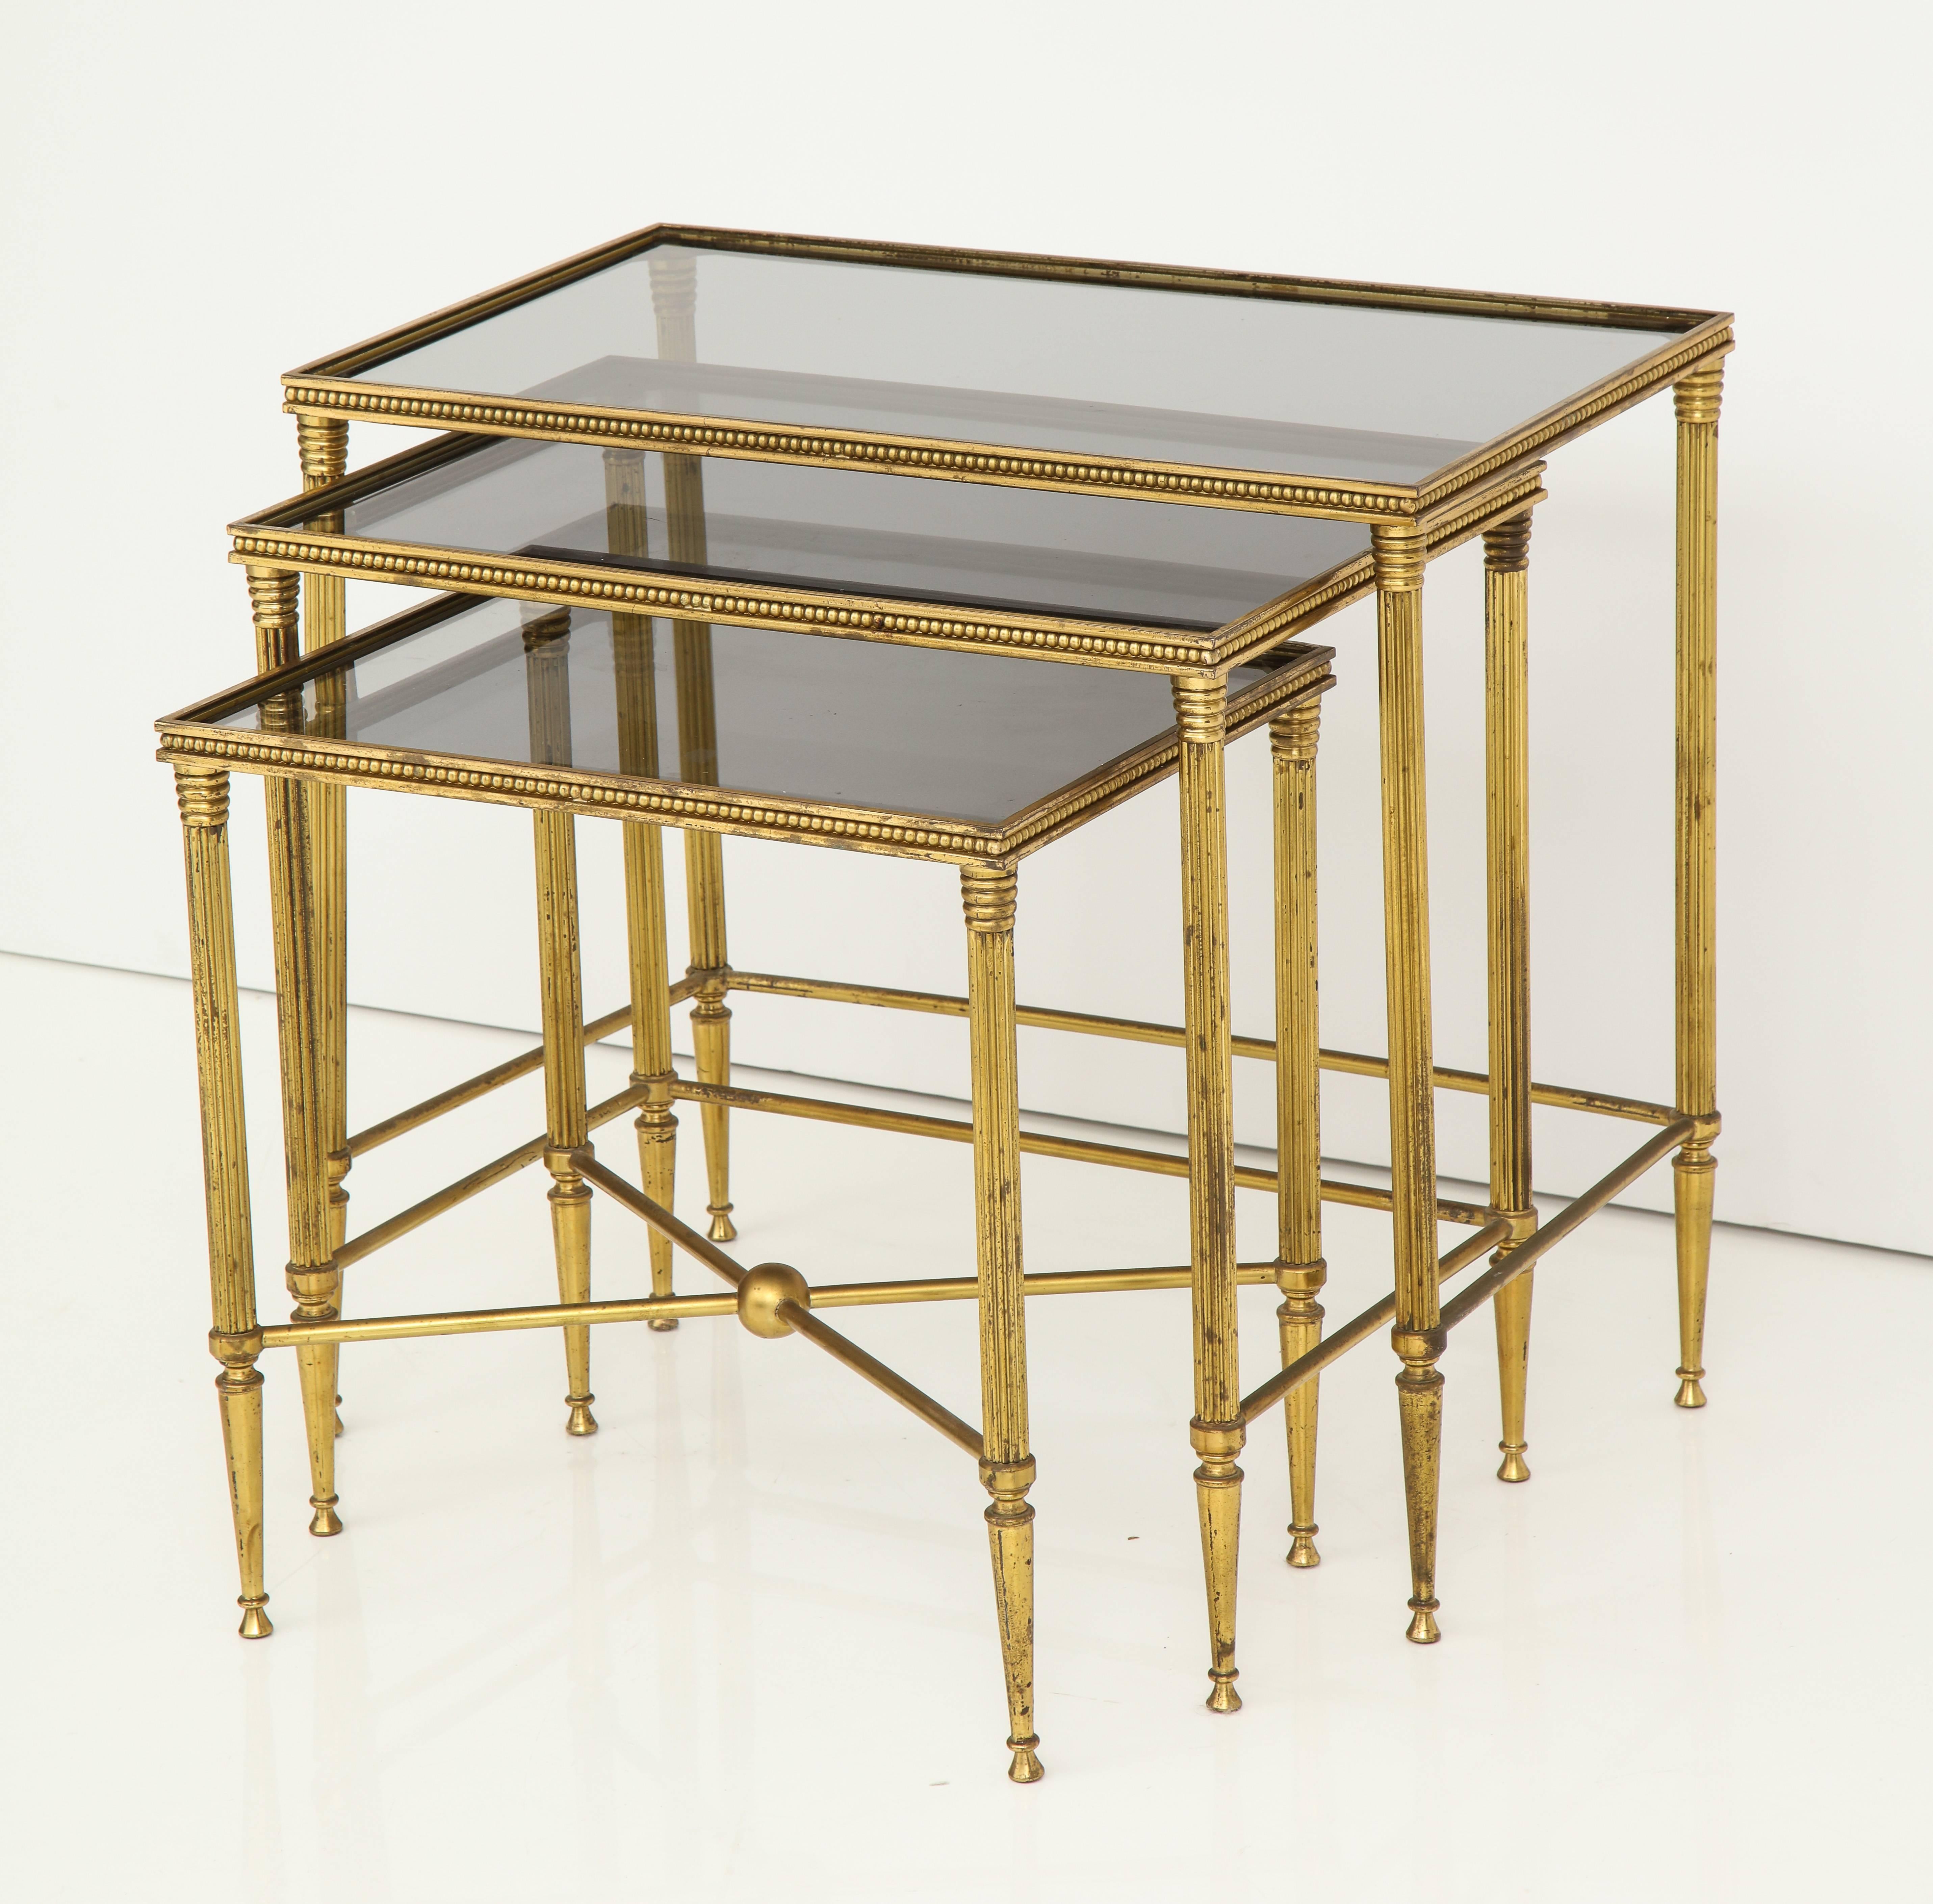 A stylish set of Italian nesting tables in brass, the legs tapered and fluted with the smallest of the three tables having a cross-stretcher. The apron with beaded decoration all around. The inset tops with smoked glass.
Italy, circa 1960
Size: 21